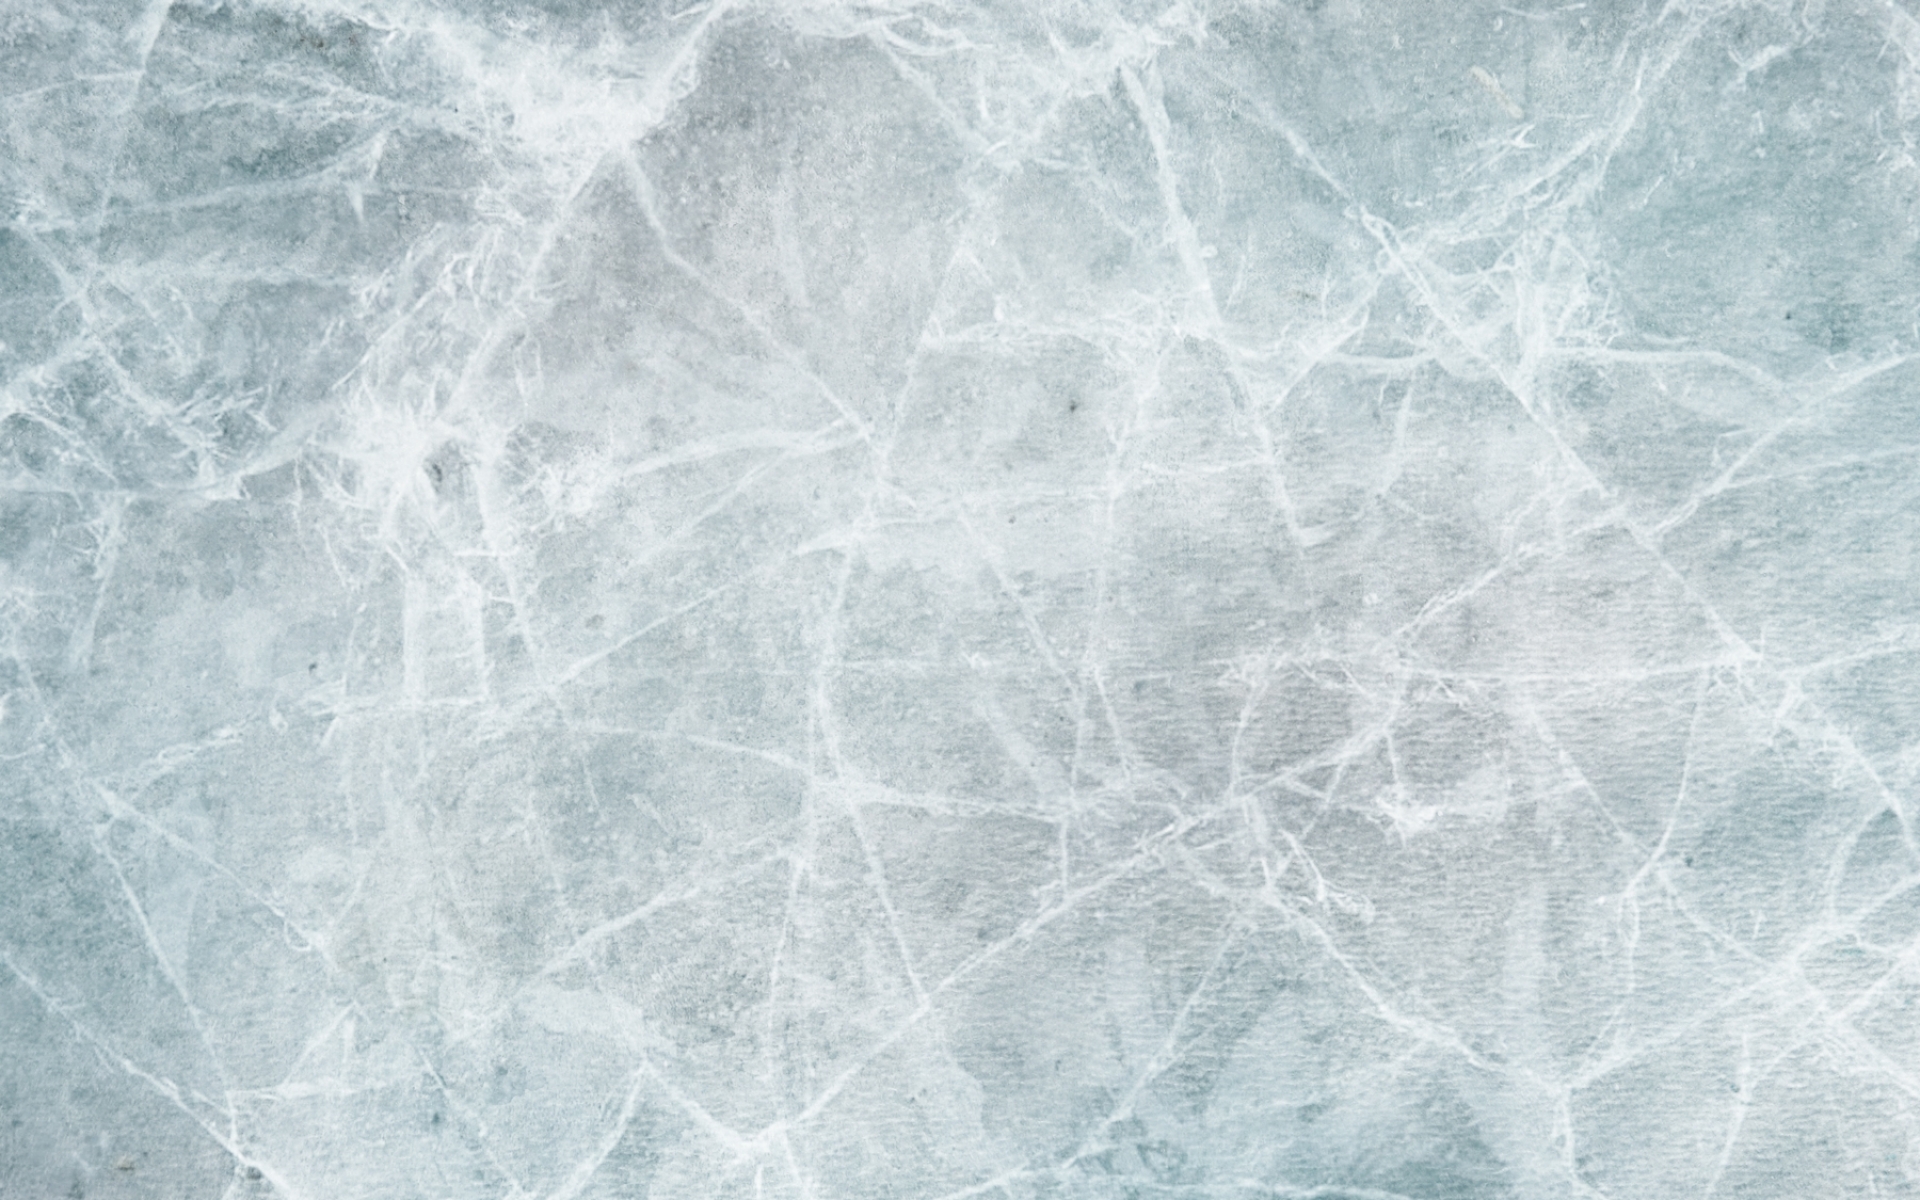 Ice Textures Stain Wallpaper